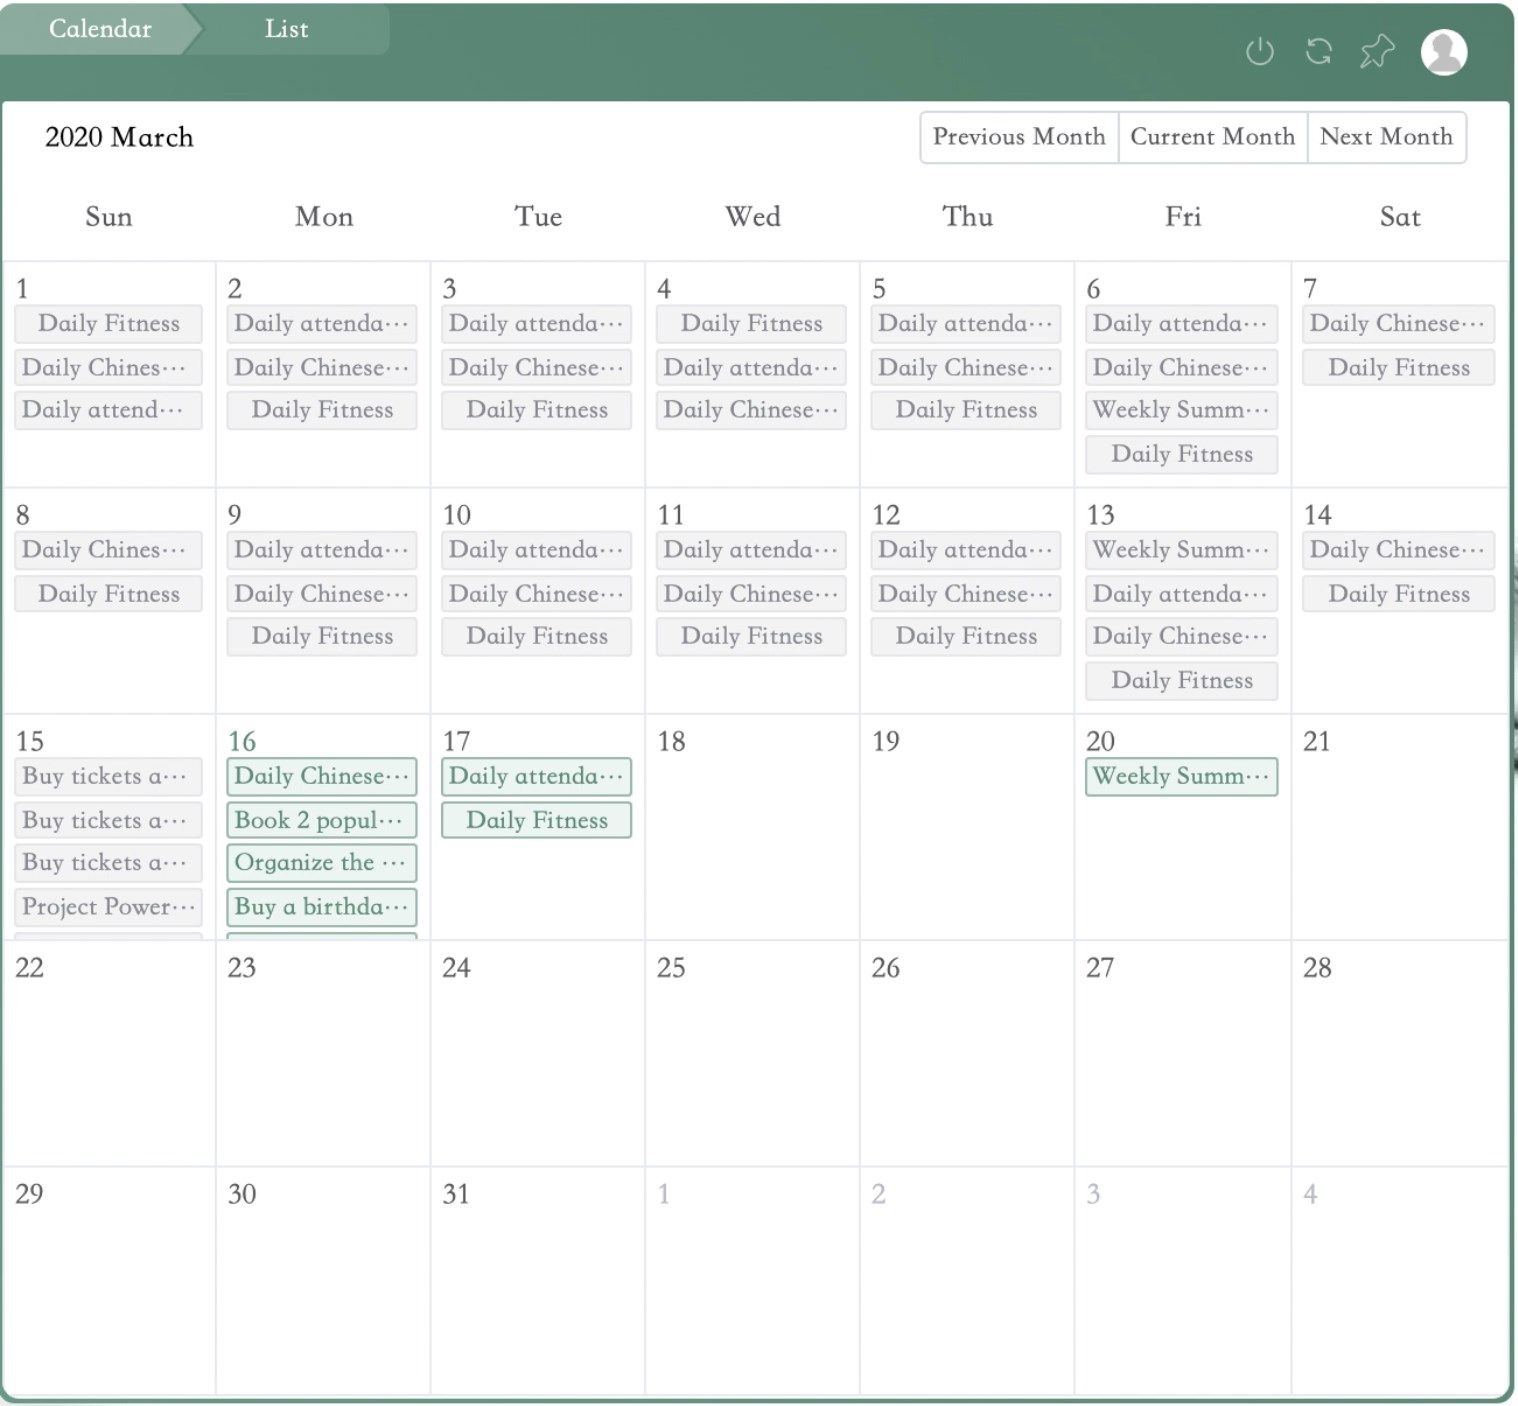 Calendar view, take the whole picture at a glance